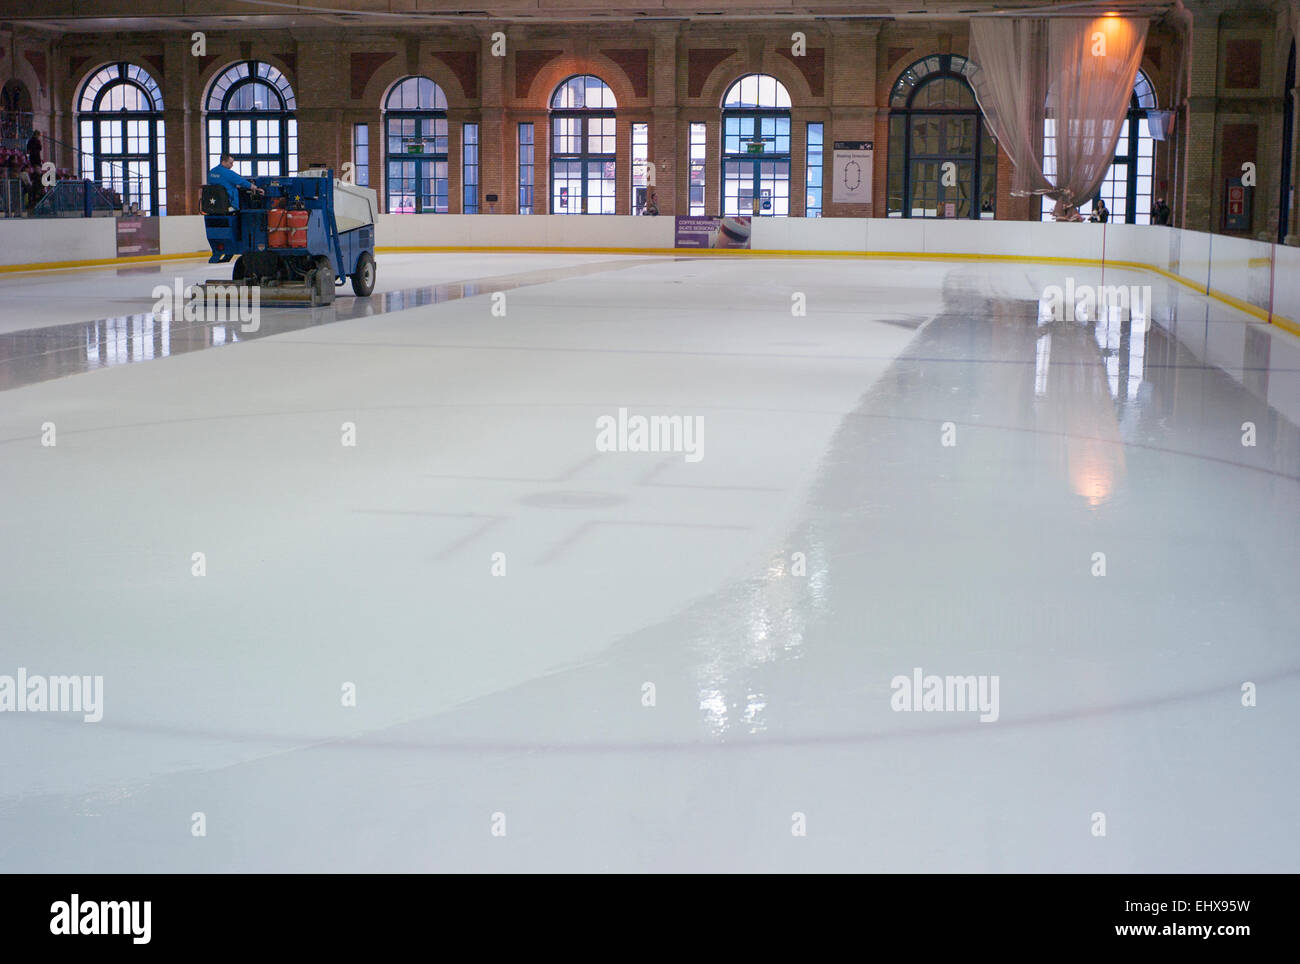 Ice resurfacing machine at indoor ice rink at Alexandra Palace renovated Victorian architecture Stock Photo